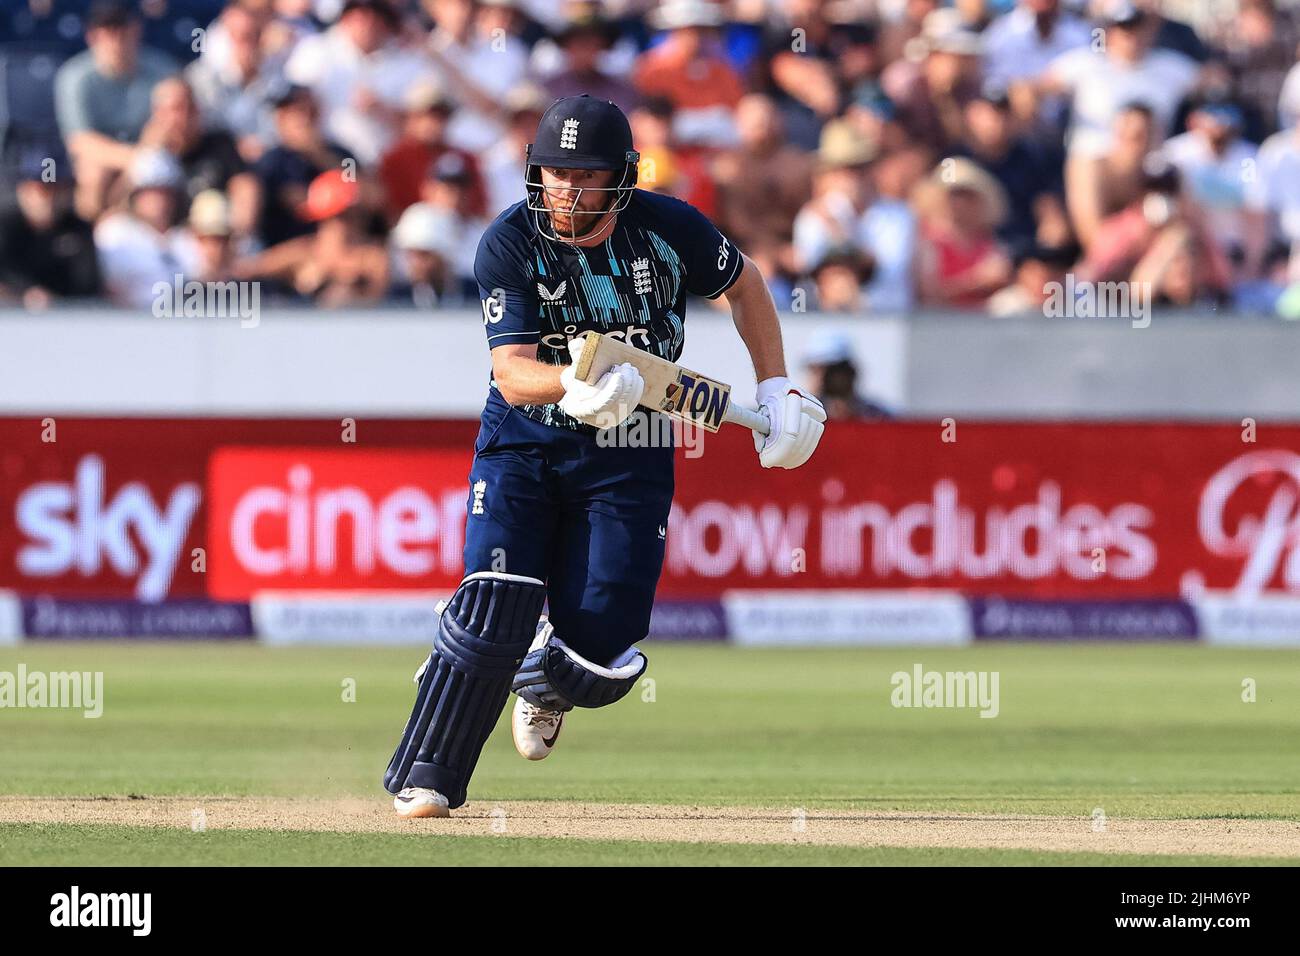 Jonny Bairstow of England makes a run during the game Stock Photo